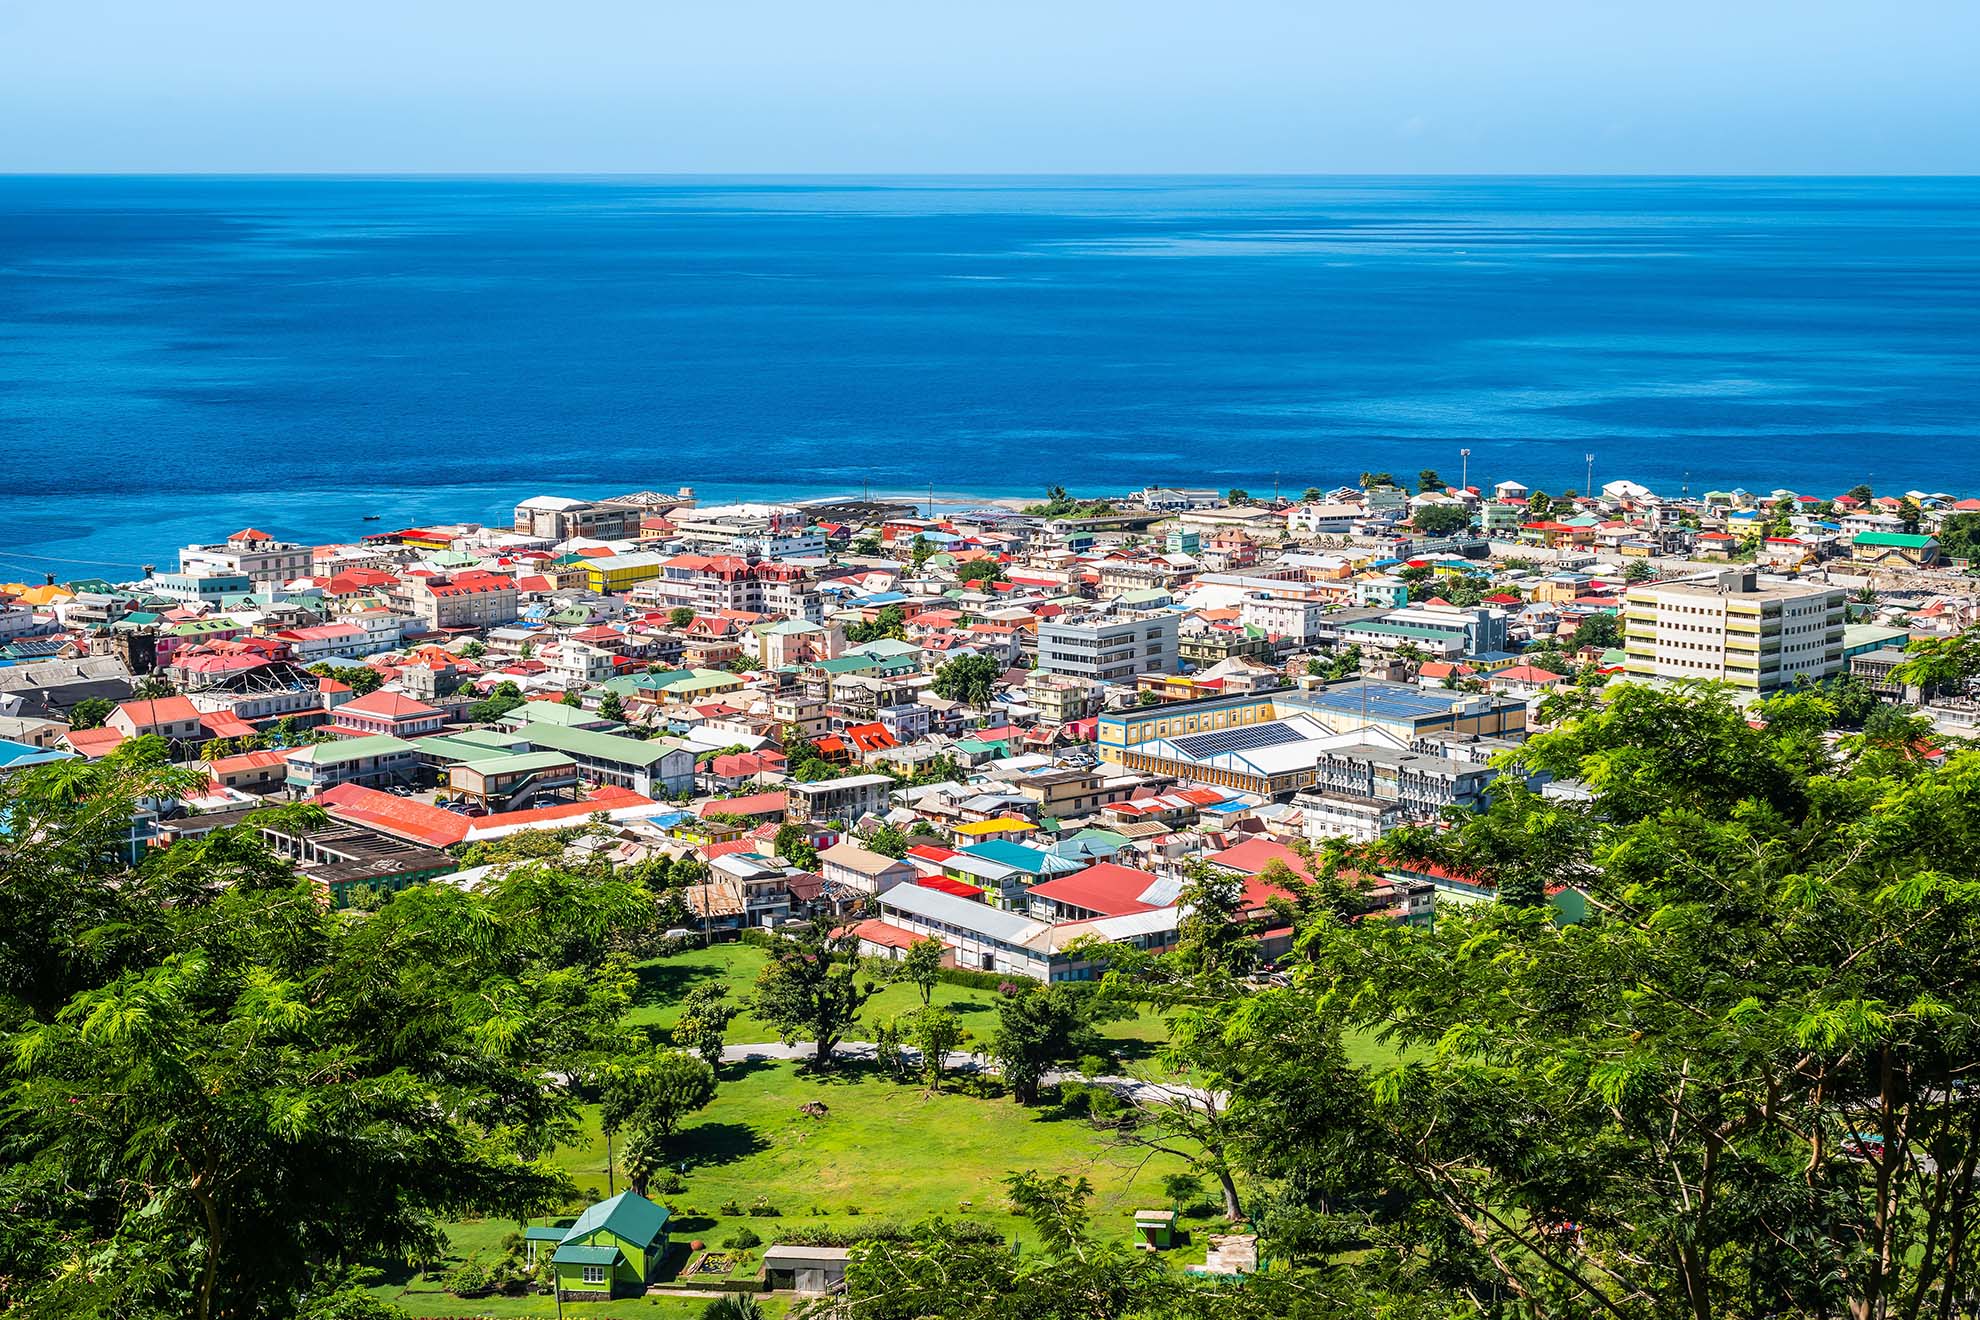 Dominica Citizenship Program - What are the most commonly asked questions?